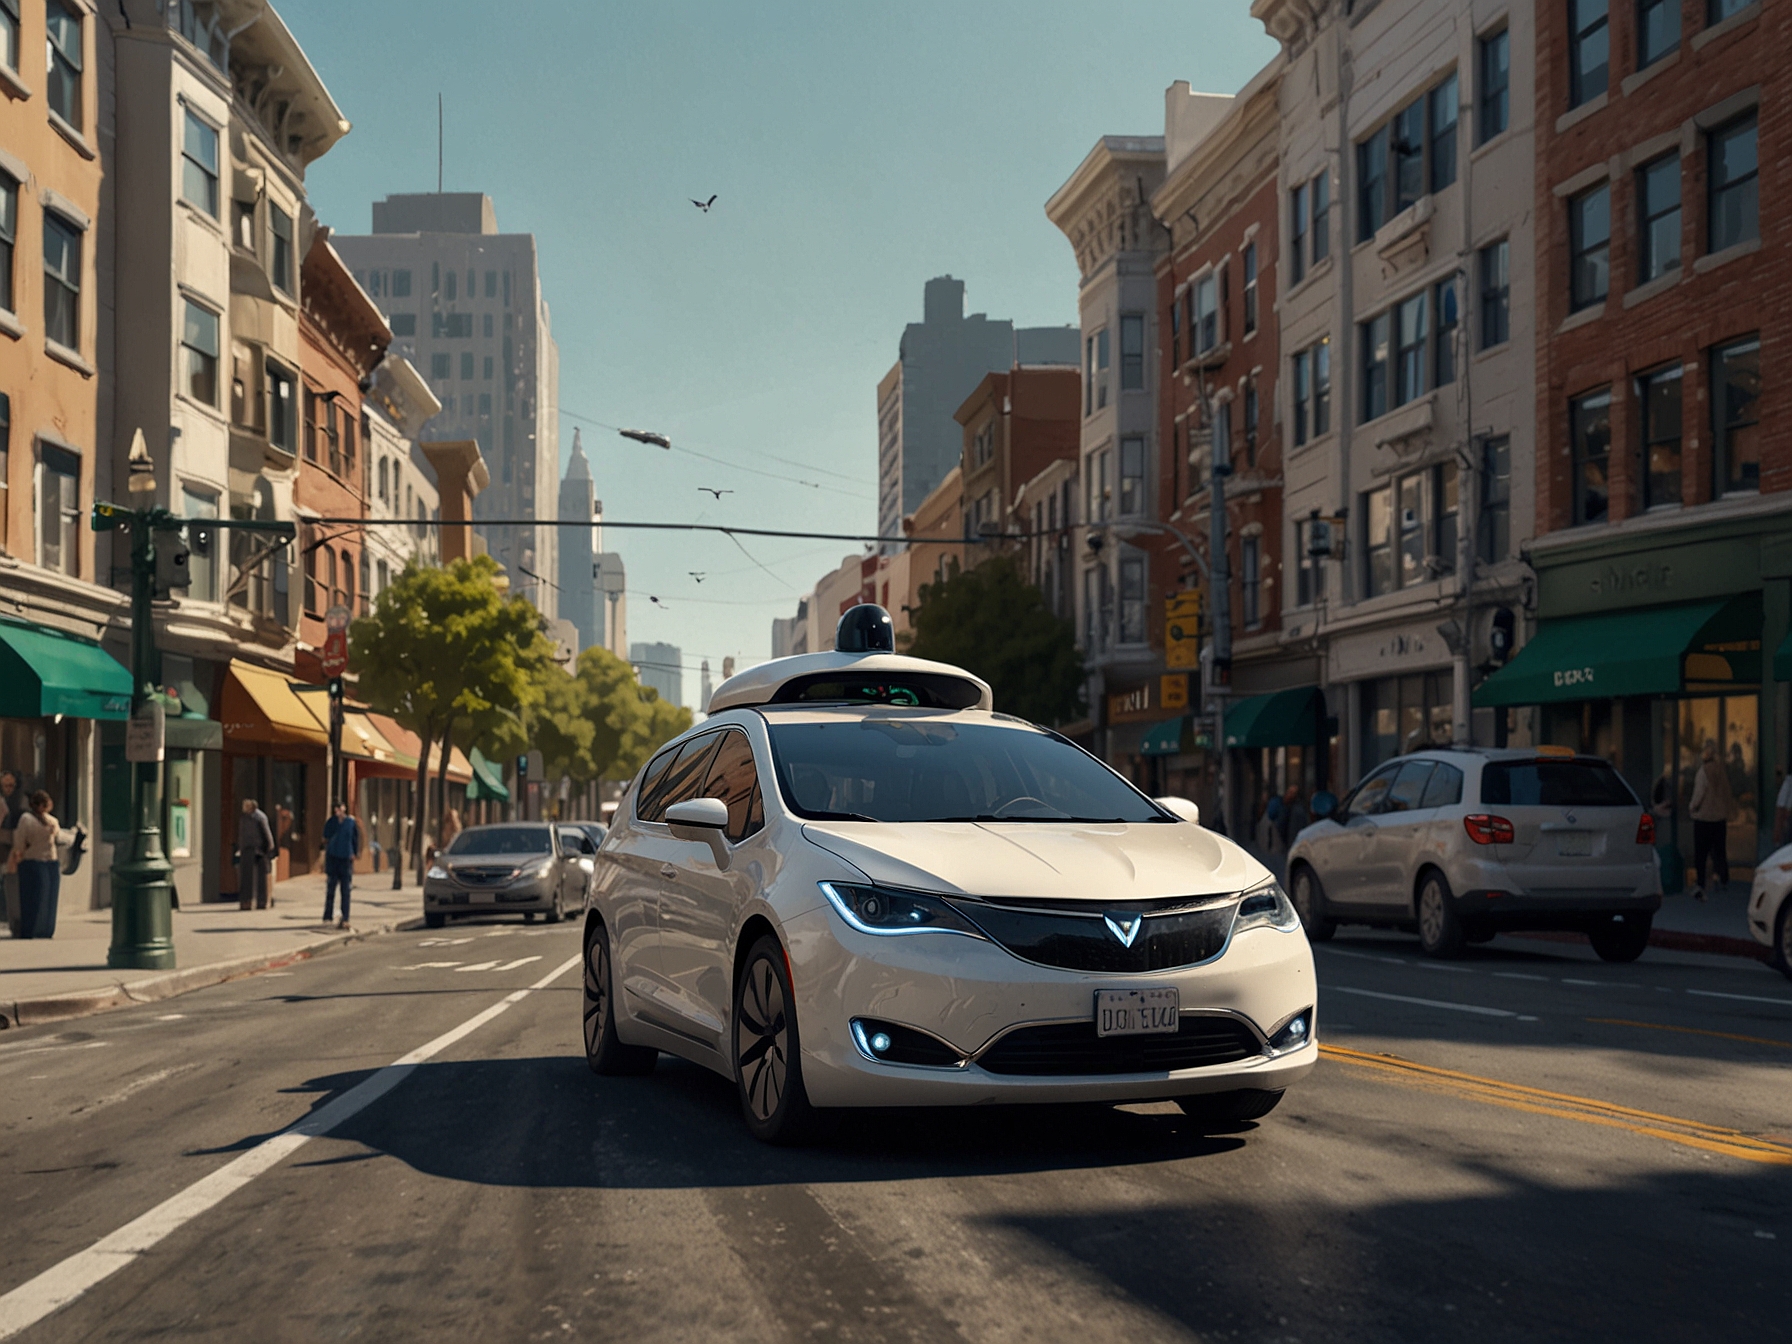 A Waymo robotaxi cruising through the busy streets of San Francisco, showcasing the futuristic technology behind autonomous vehicles now accessible to the general public.